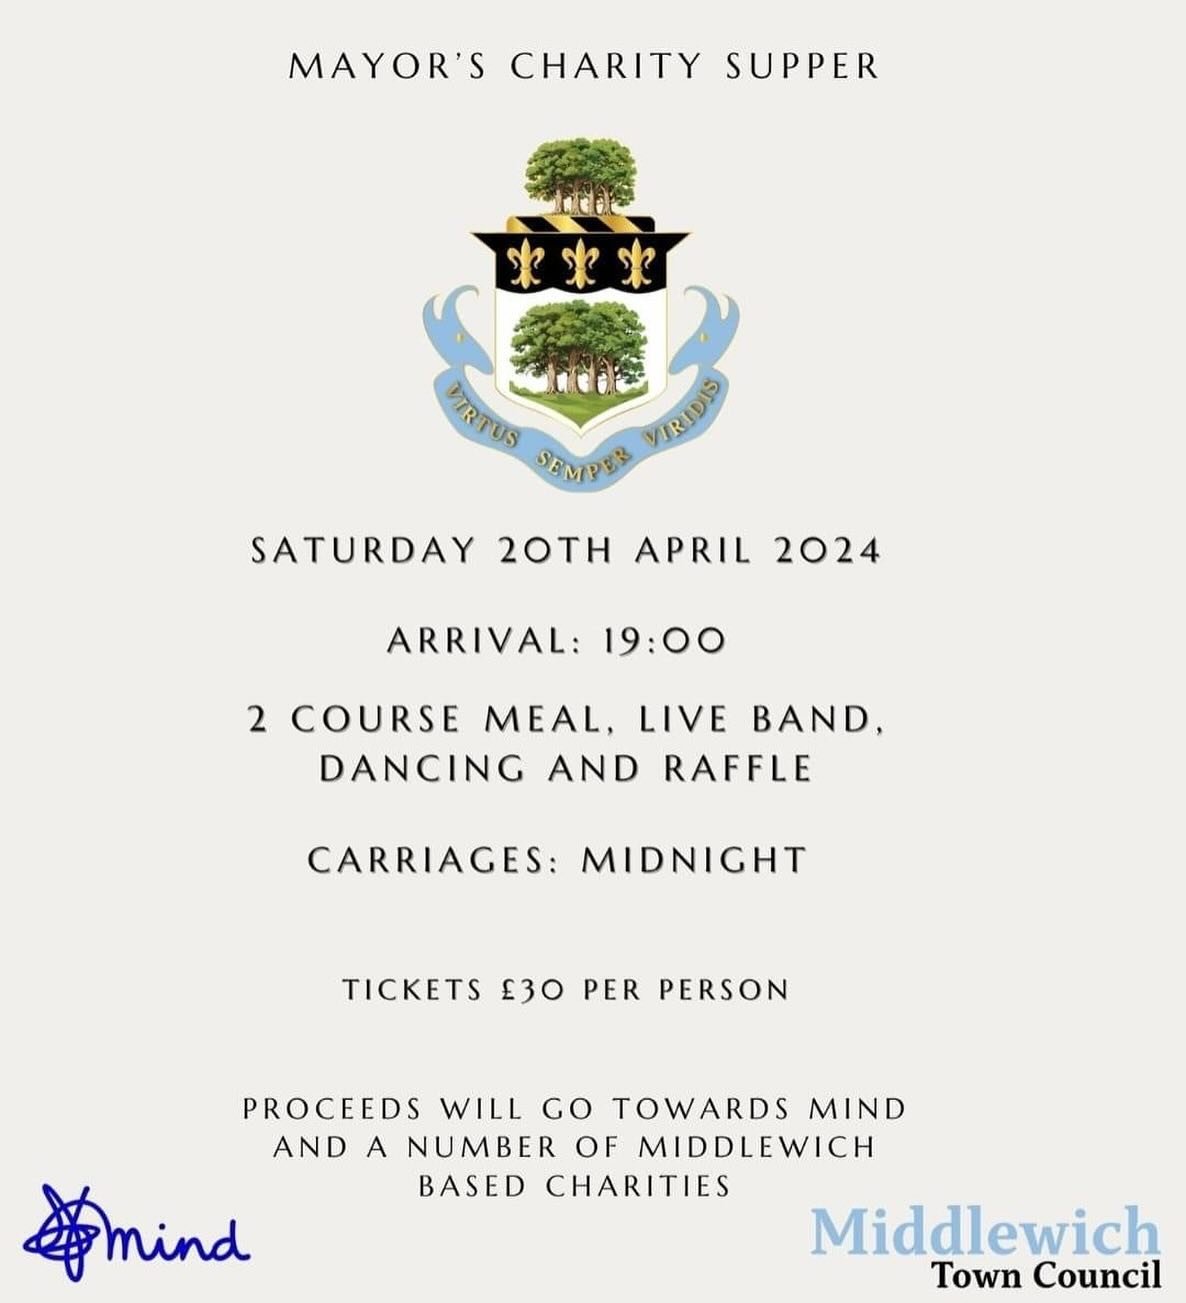 🎉 we&rsquo;re happy to announce that HM Sound &amp; Events will be on the decks for the highly-anticipated Mayor&rsquo;s Charity Supper happening on April 20th! 🎶 

Join us as we raise funds for local charities and support @mindcharity in their mis